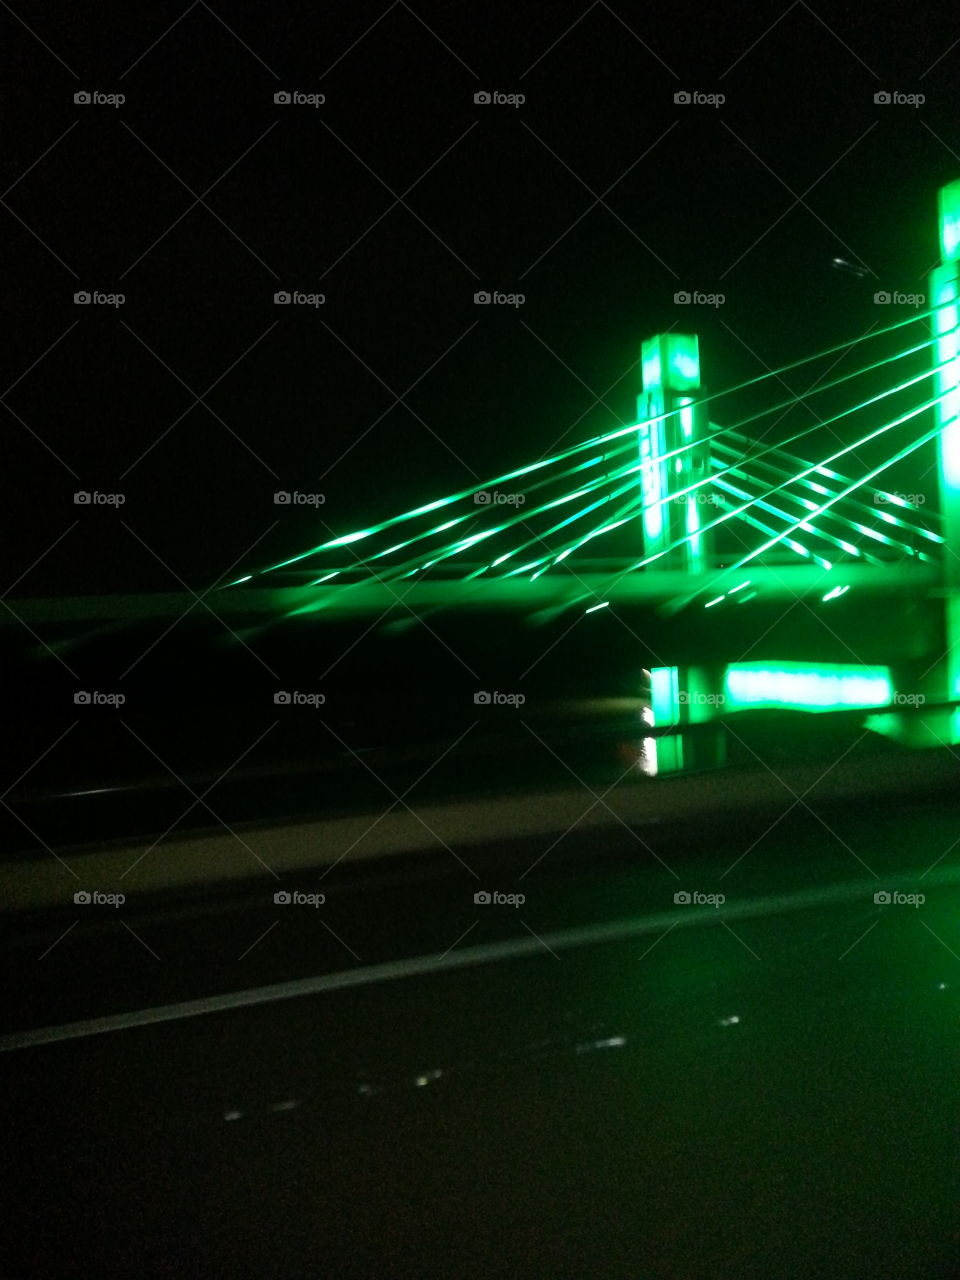 green tonight. new bridge by baylor stadium a different color every time I pass